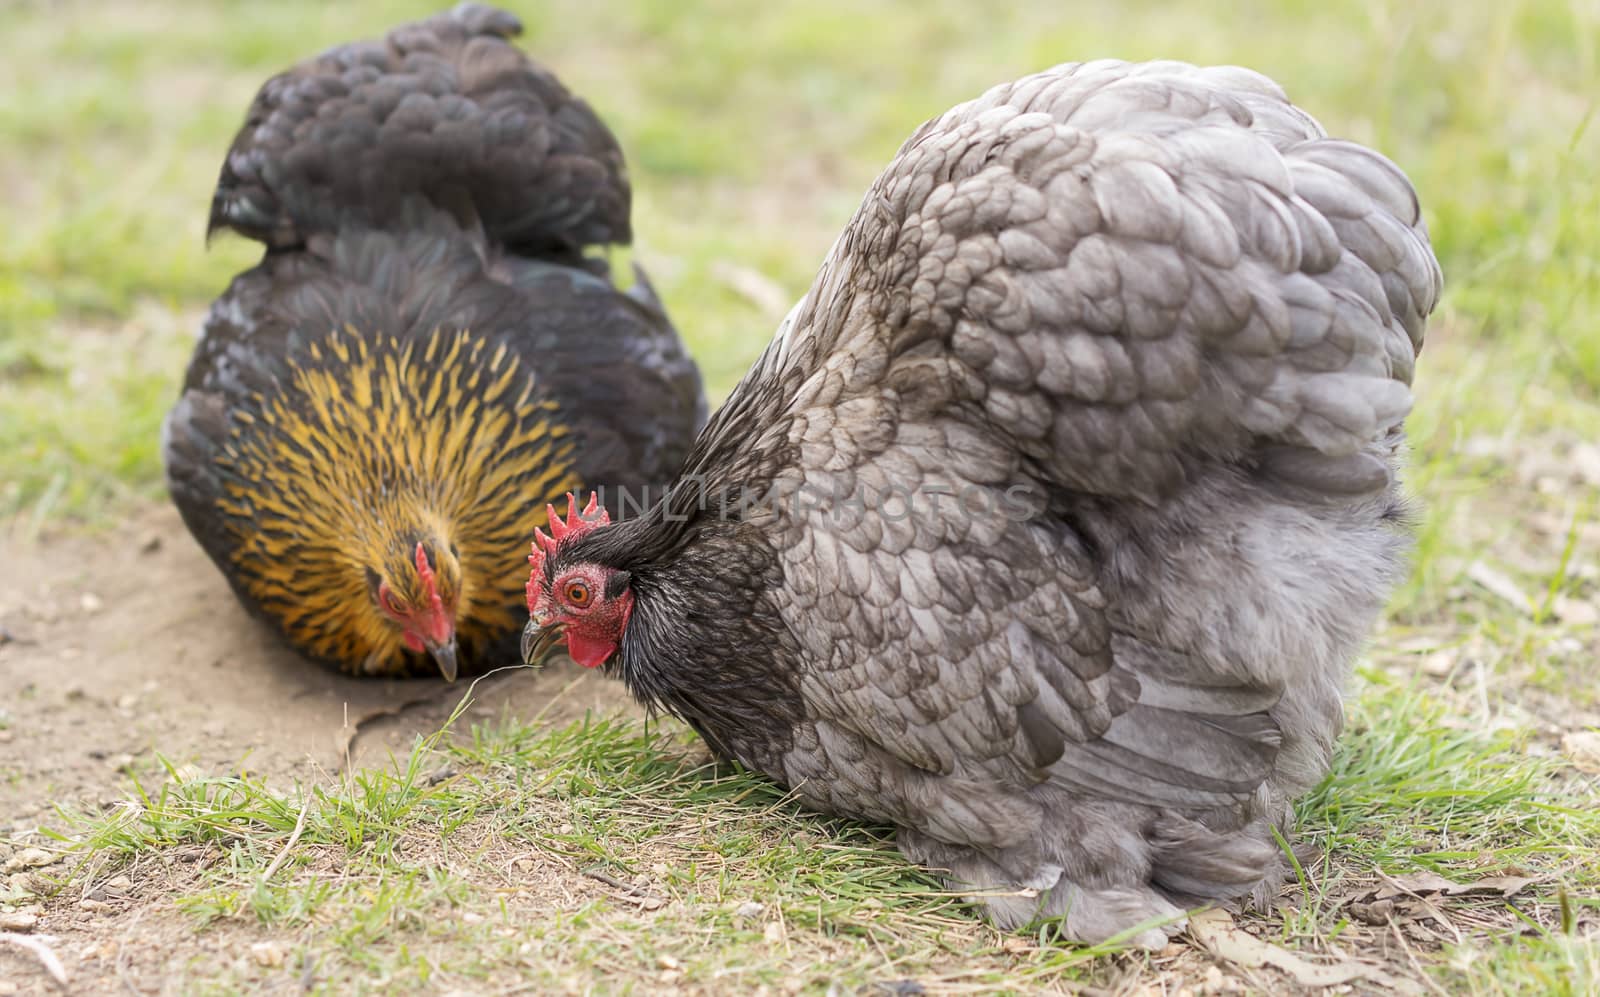 Two bantam hens on spring day by sherj